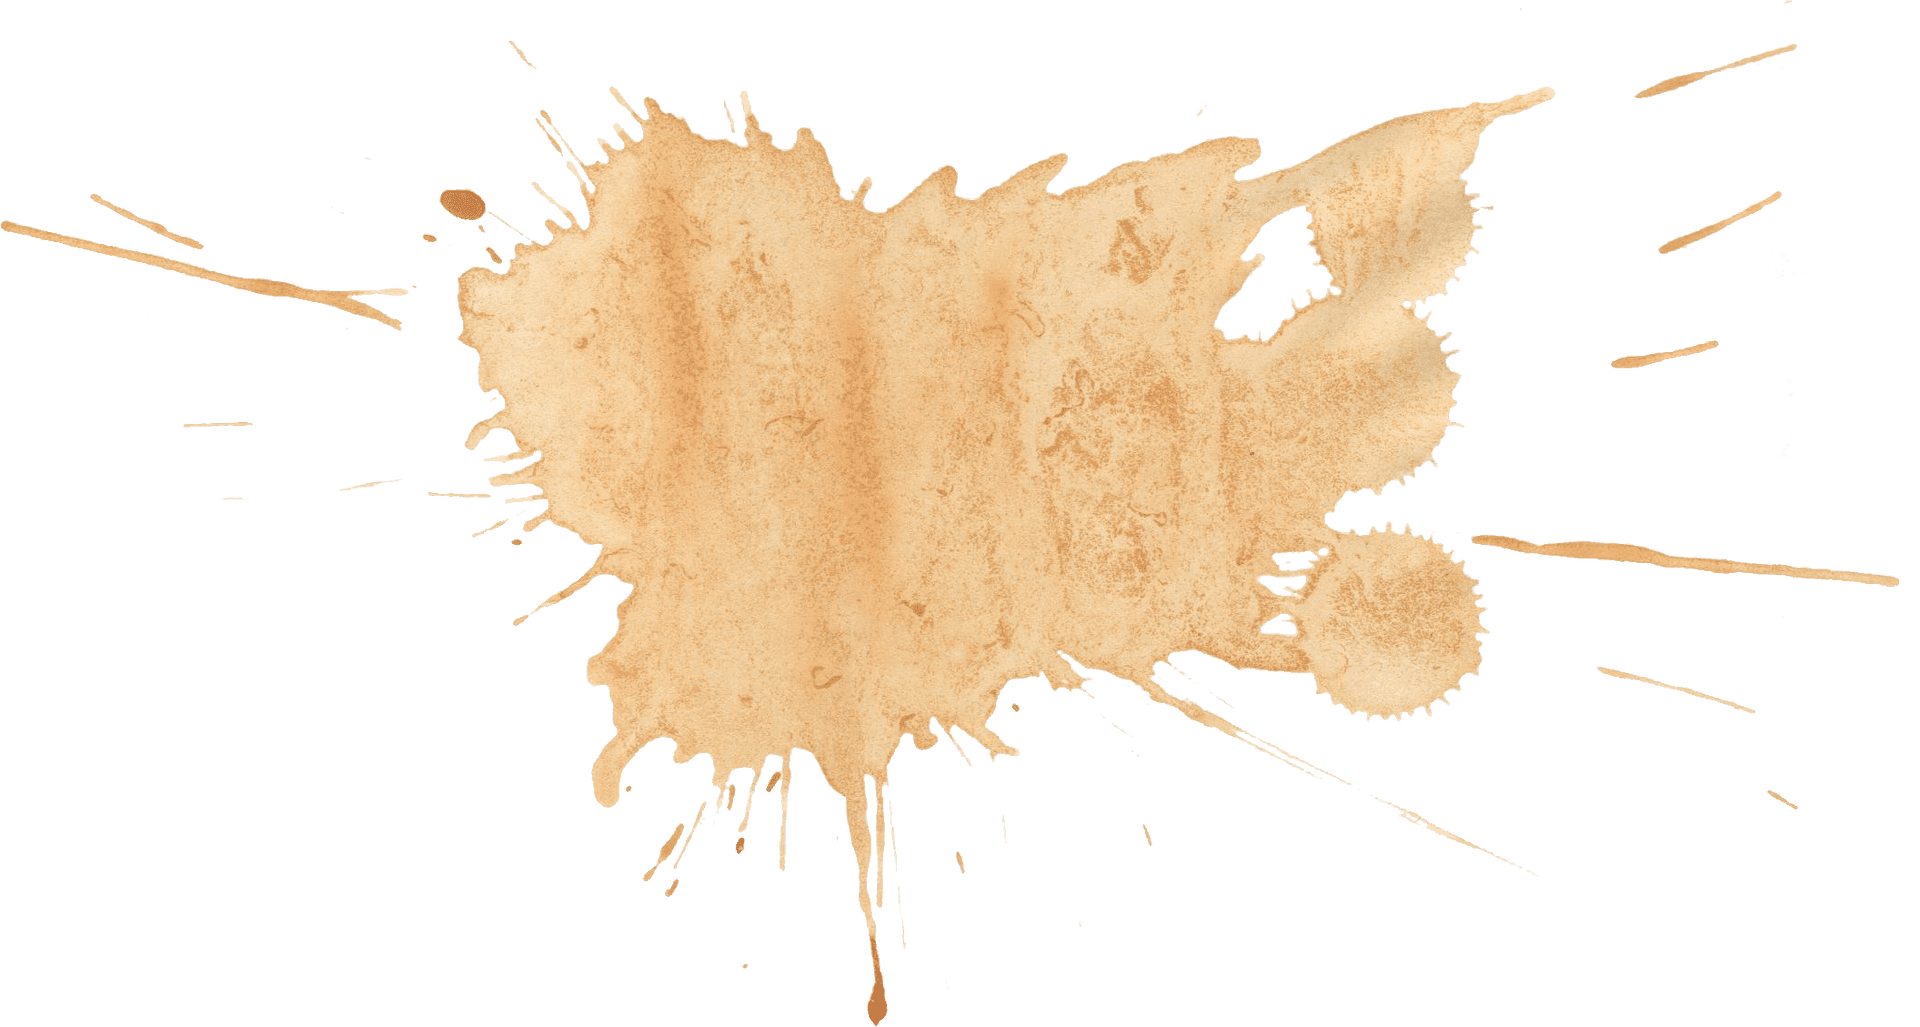 Abstract Coffee Stain Splashon Teal Background PNG image